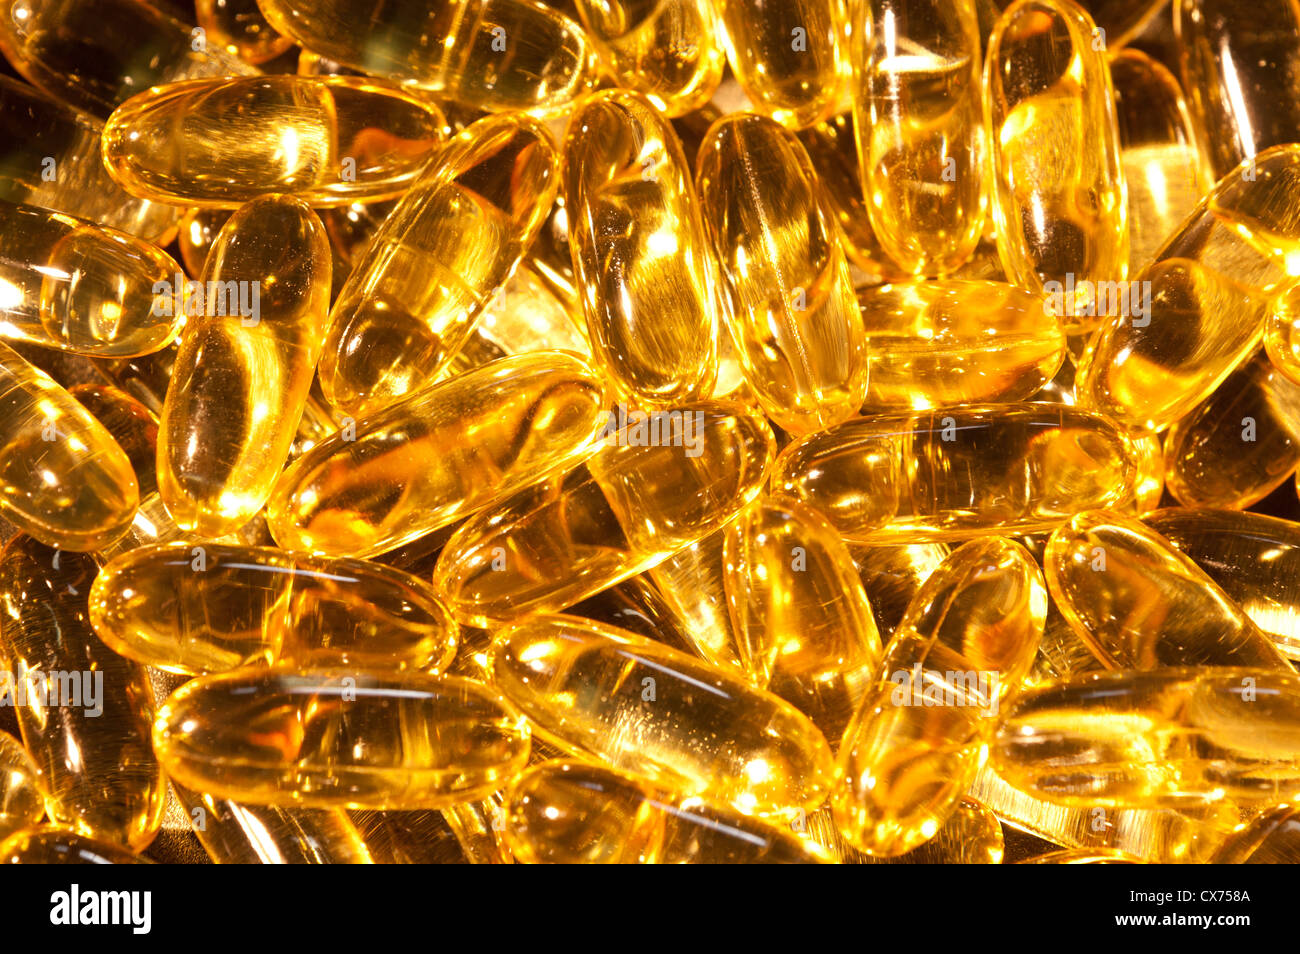 OMEGA 3 FISH OIL CAPSULES supplements for health. Backlit soft gel capsules Stock Photo